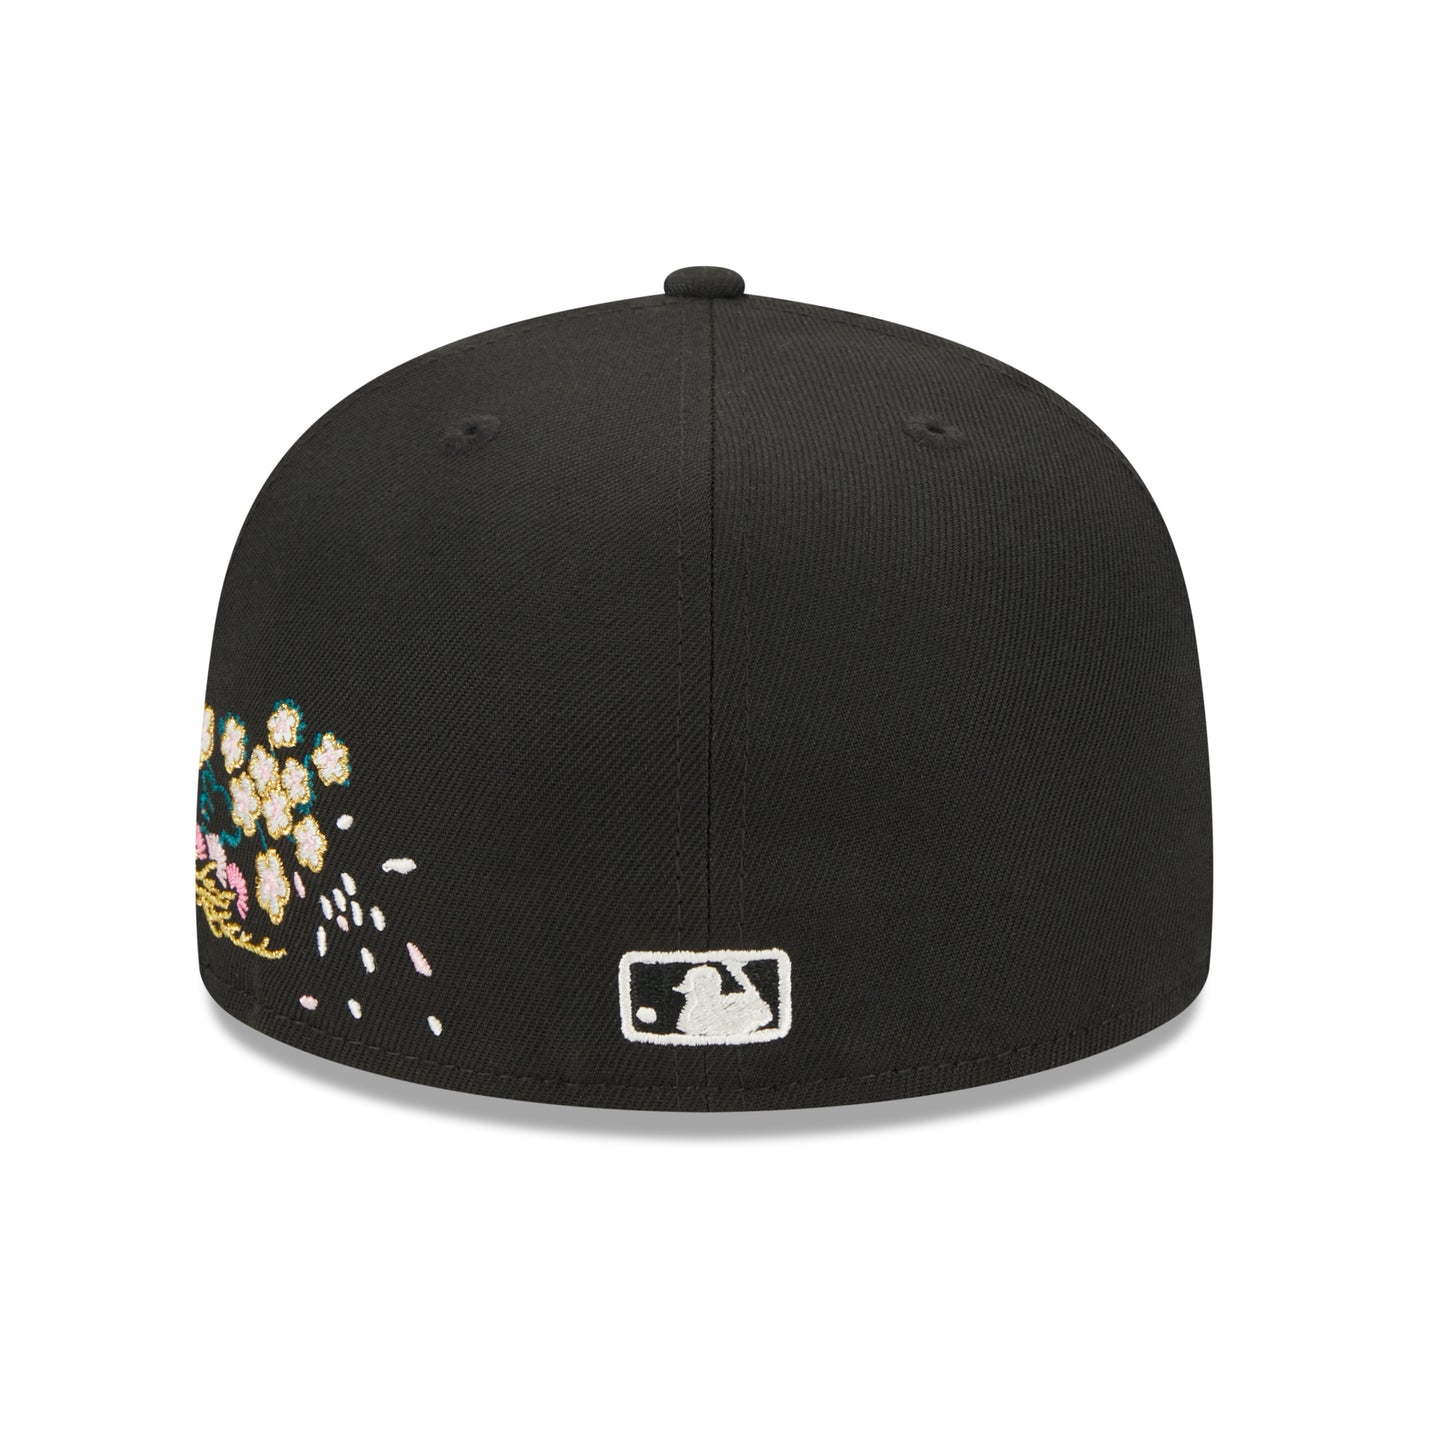 NEW ERA 59FIFTY MLB LOS ANGELES DODGERS CHERRY BLOSSOM BLACK / GREY UV FITTED CAP